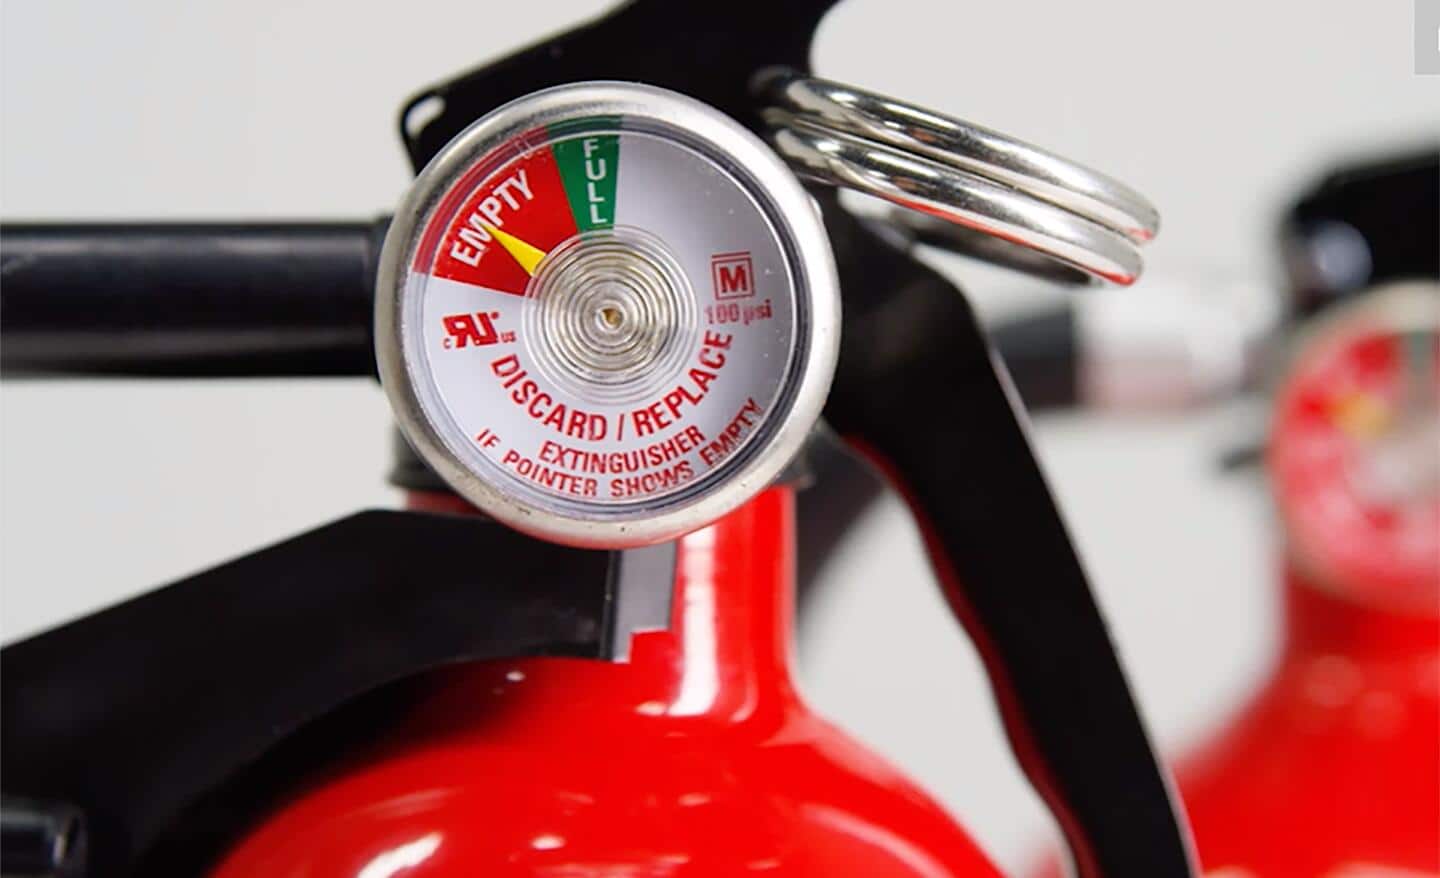  A fire extinguisher gauge showing it is empty.